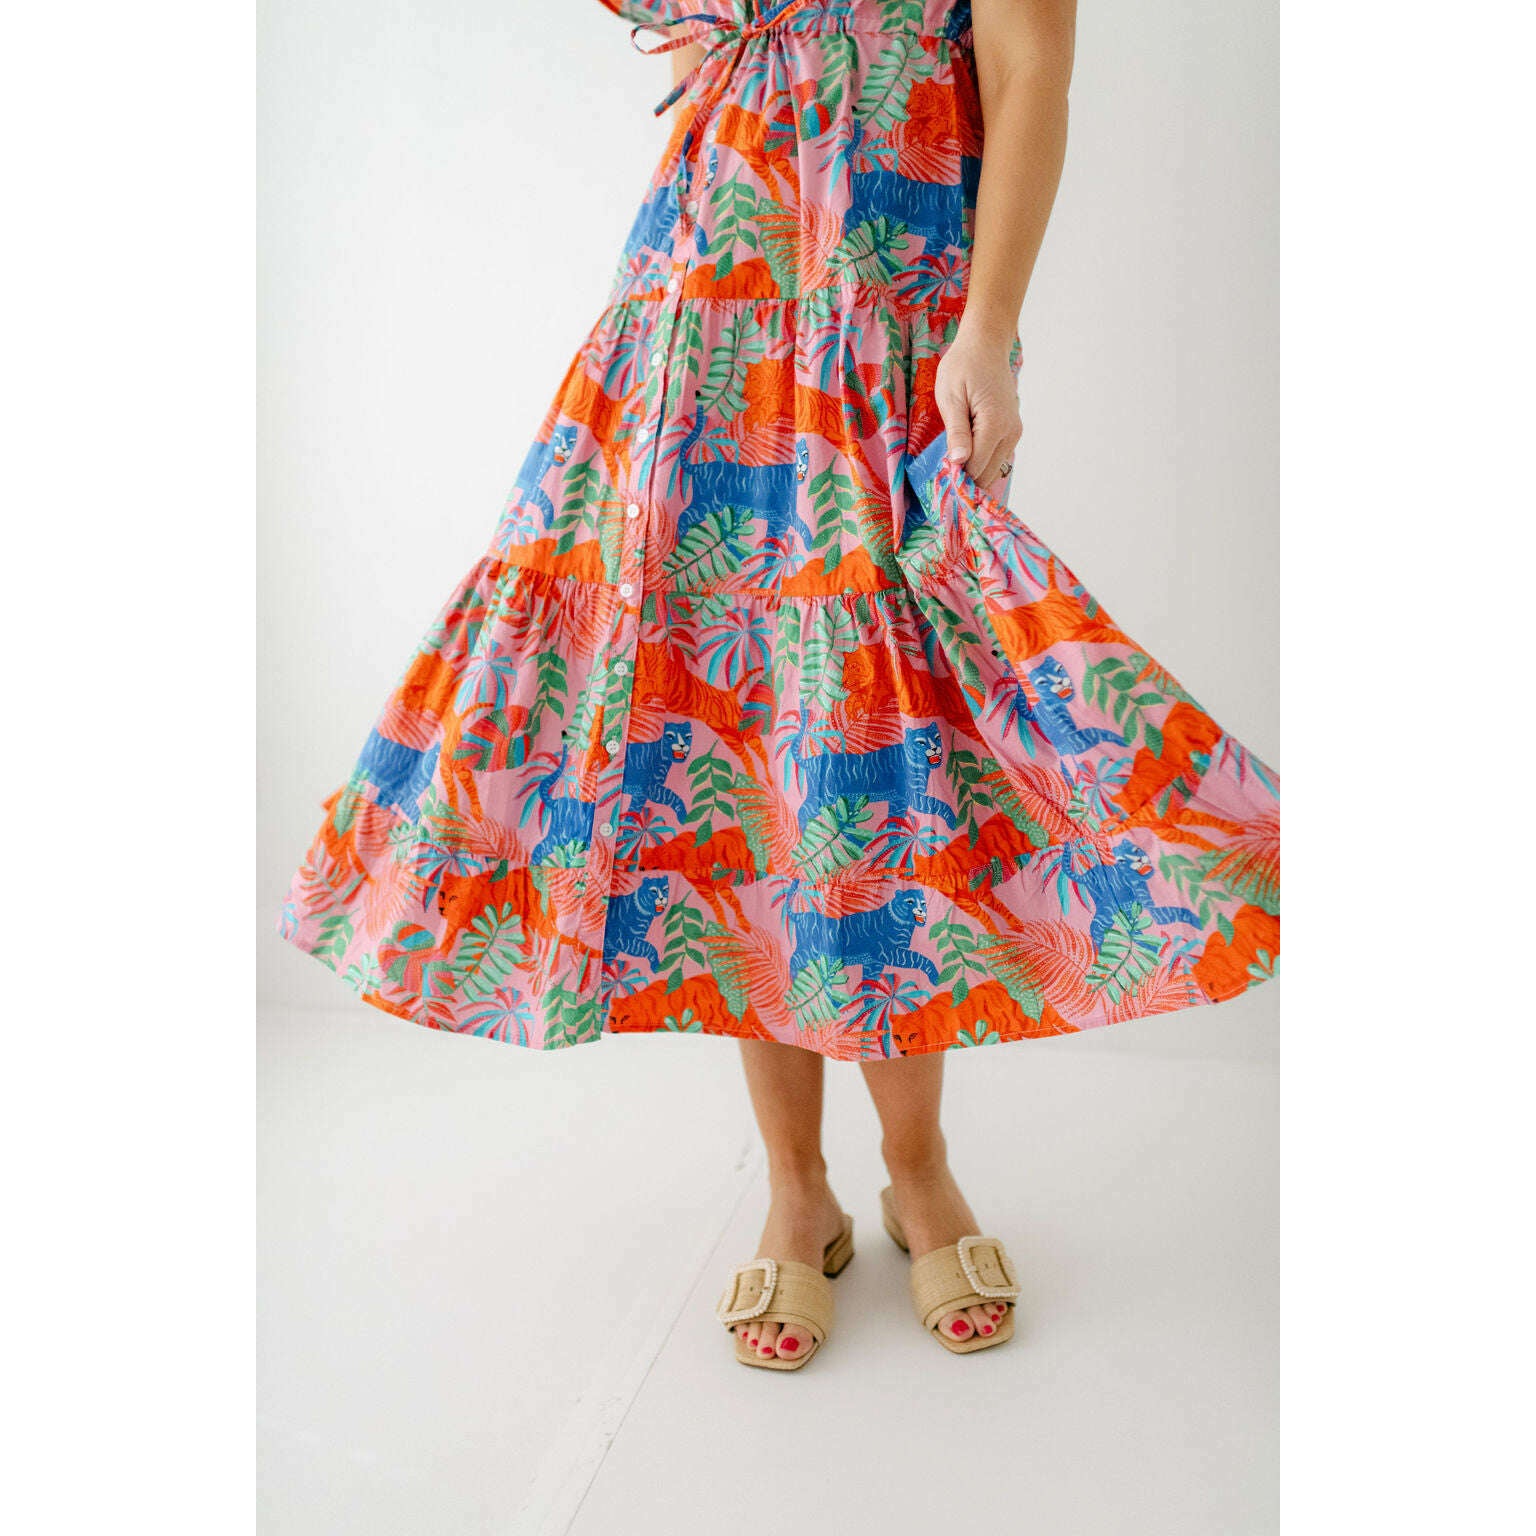 8.28 Boutique:Marigold by Victoria Dunn,Marigold Hurley Dress in Tangerine Tango,Dress